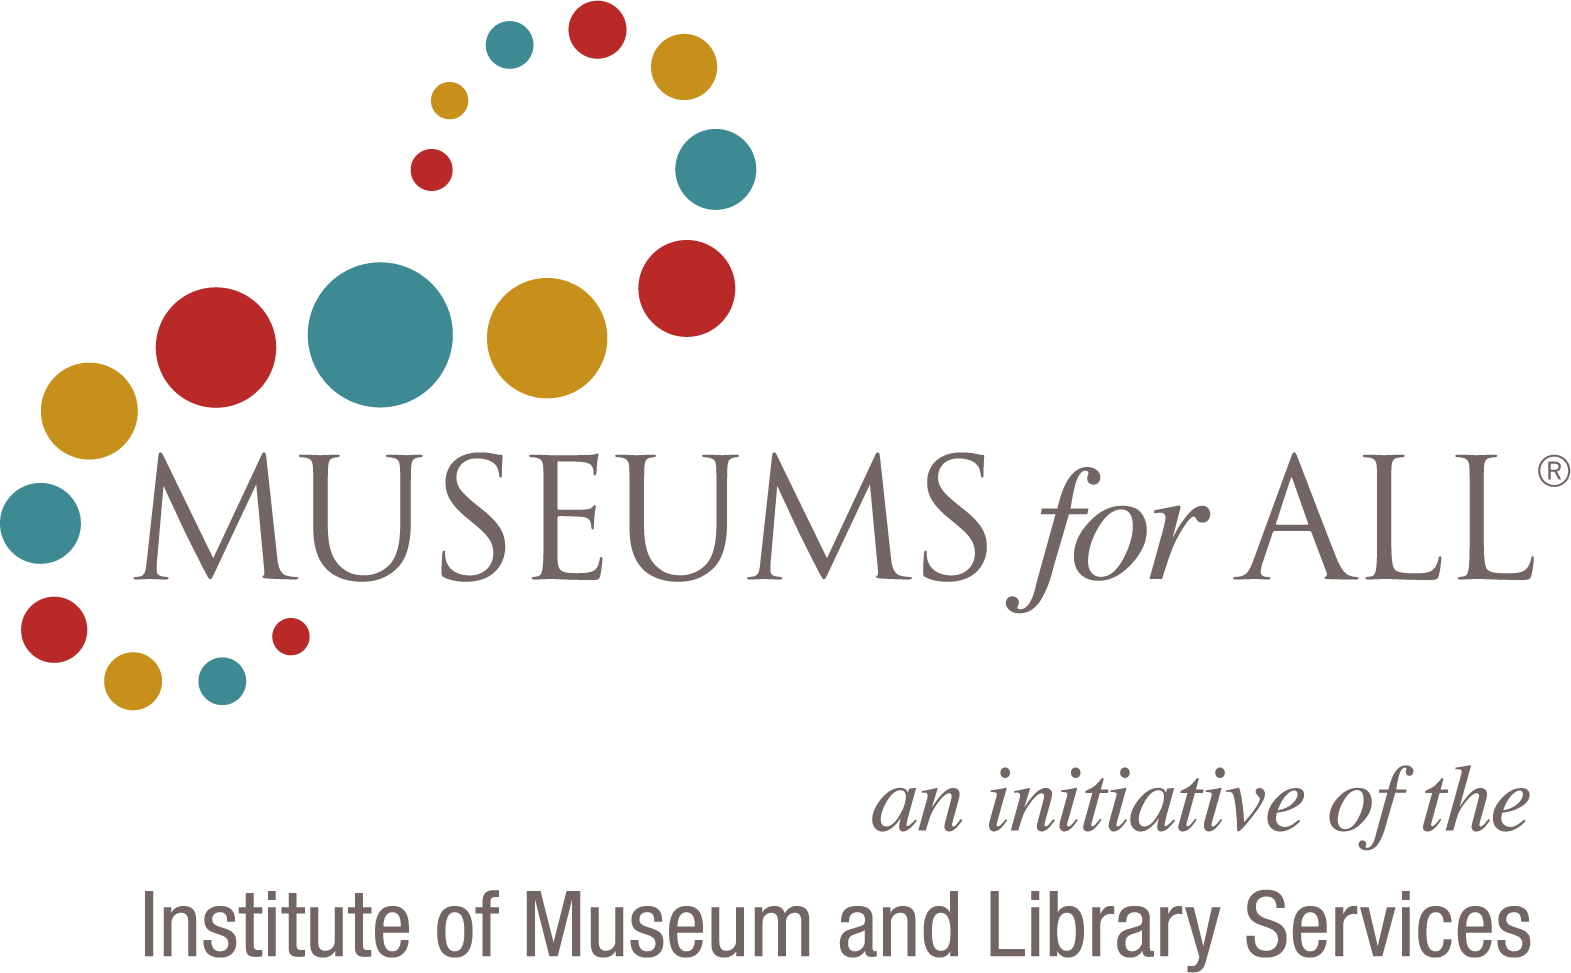 A logo for "Museums for All"